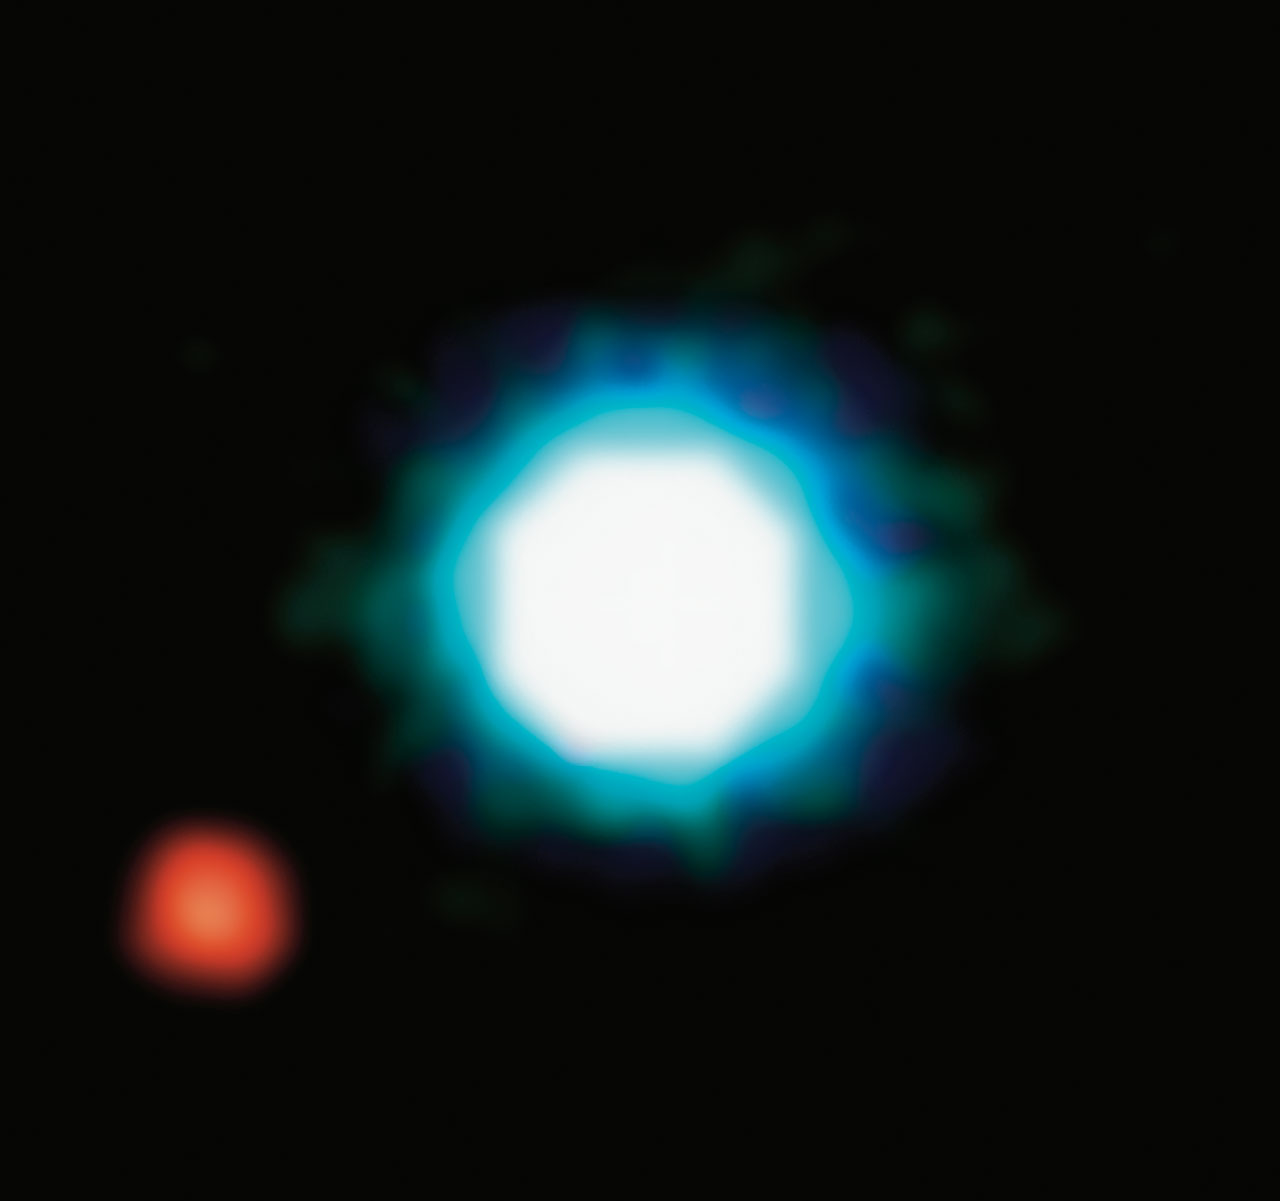 2M1207b - first image of an exoplanet